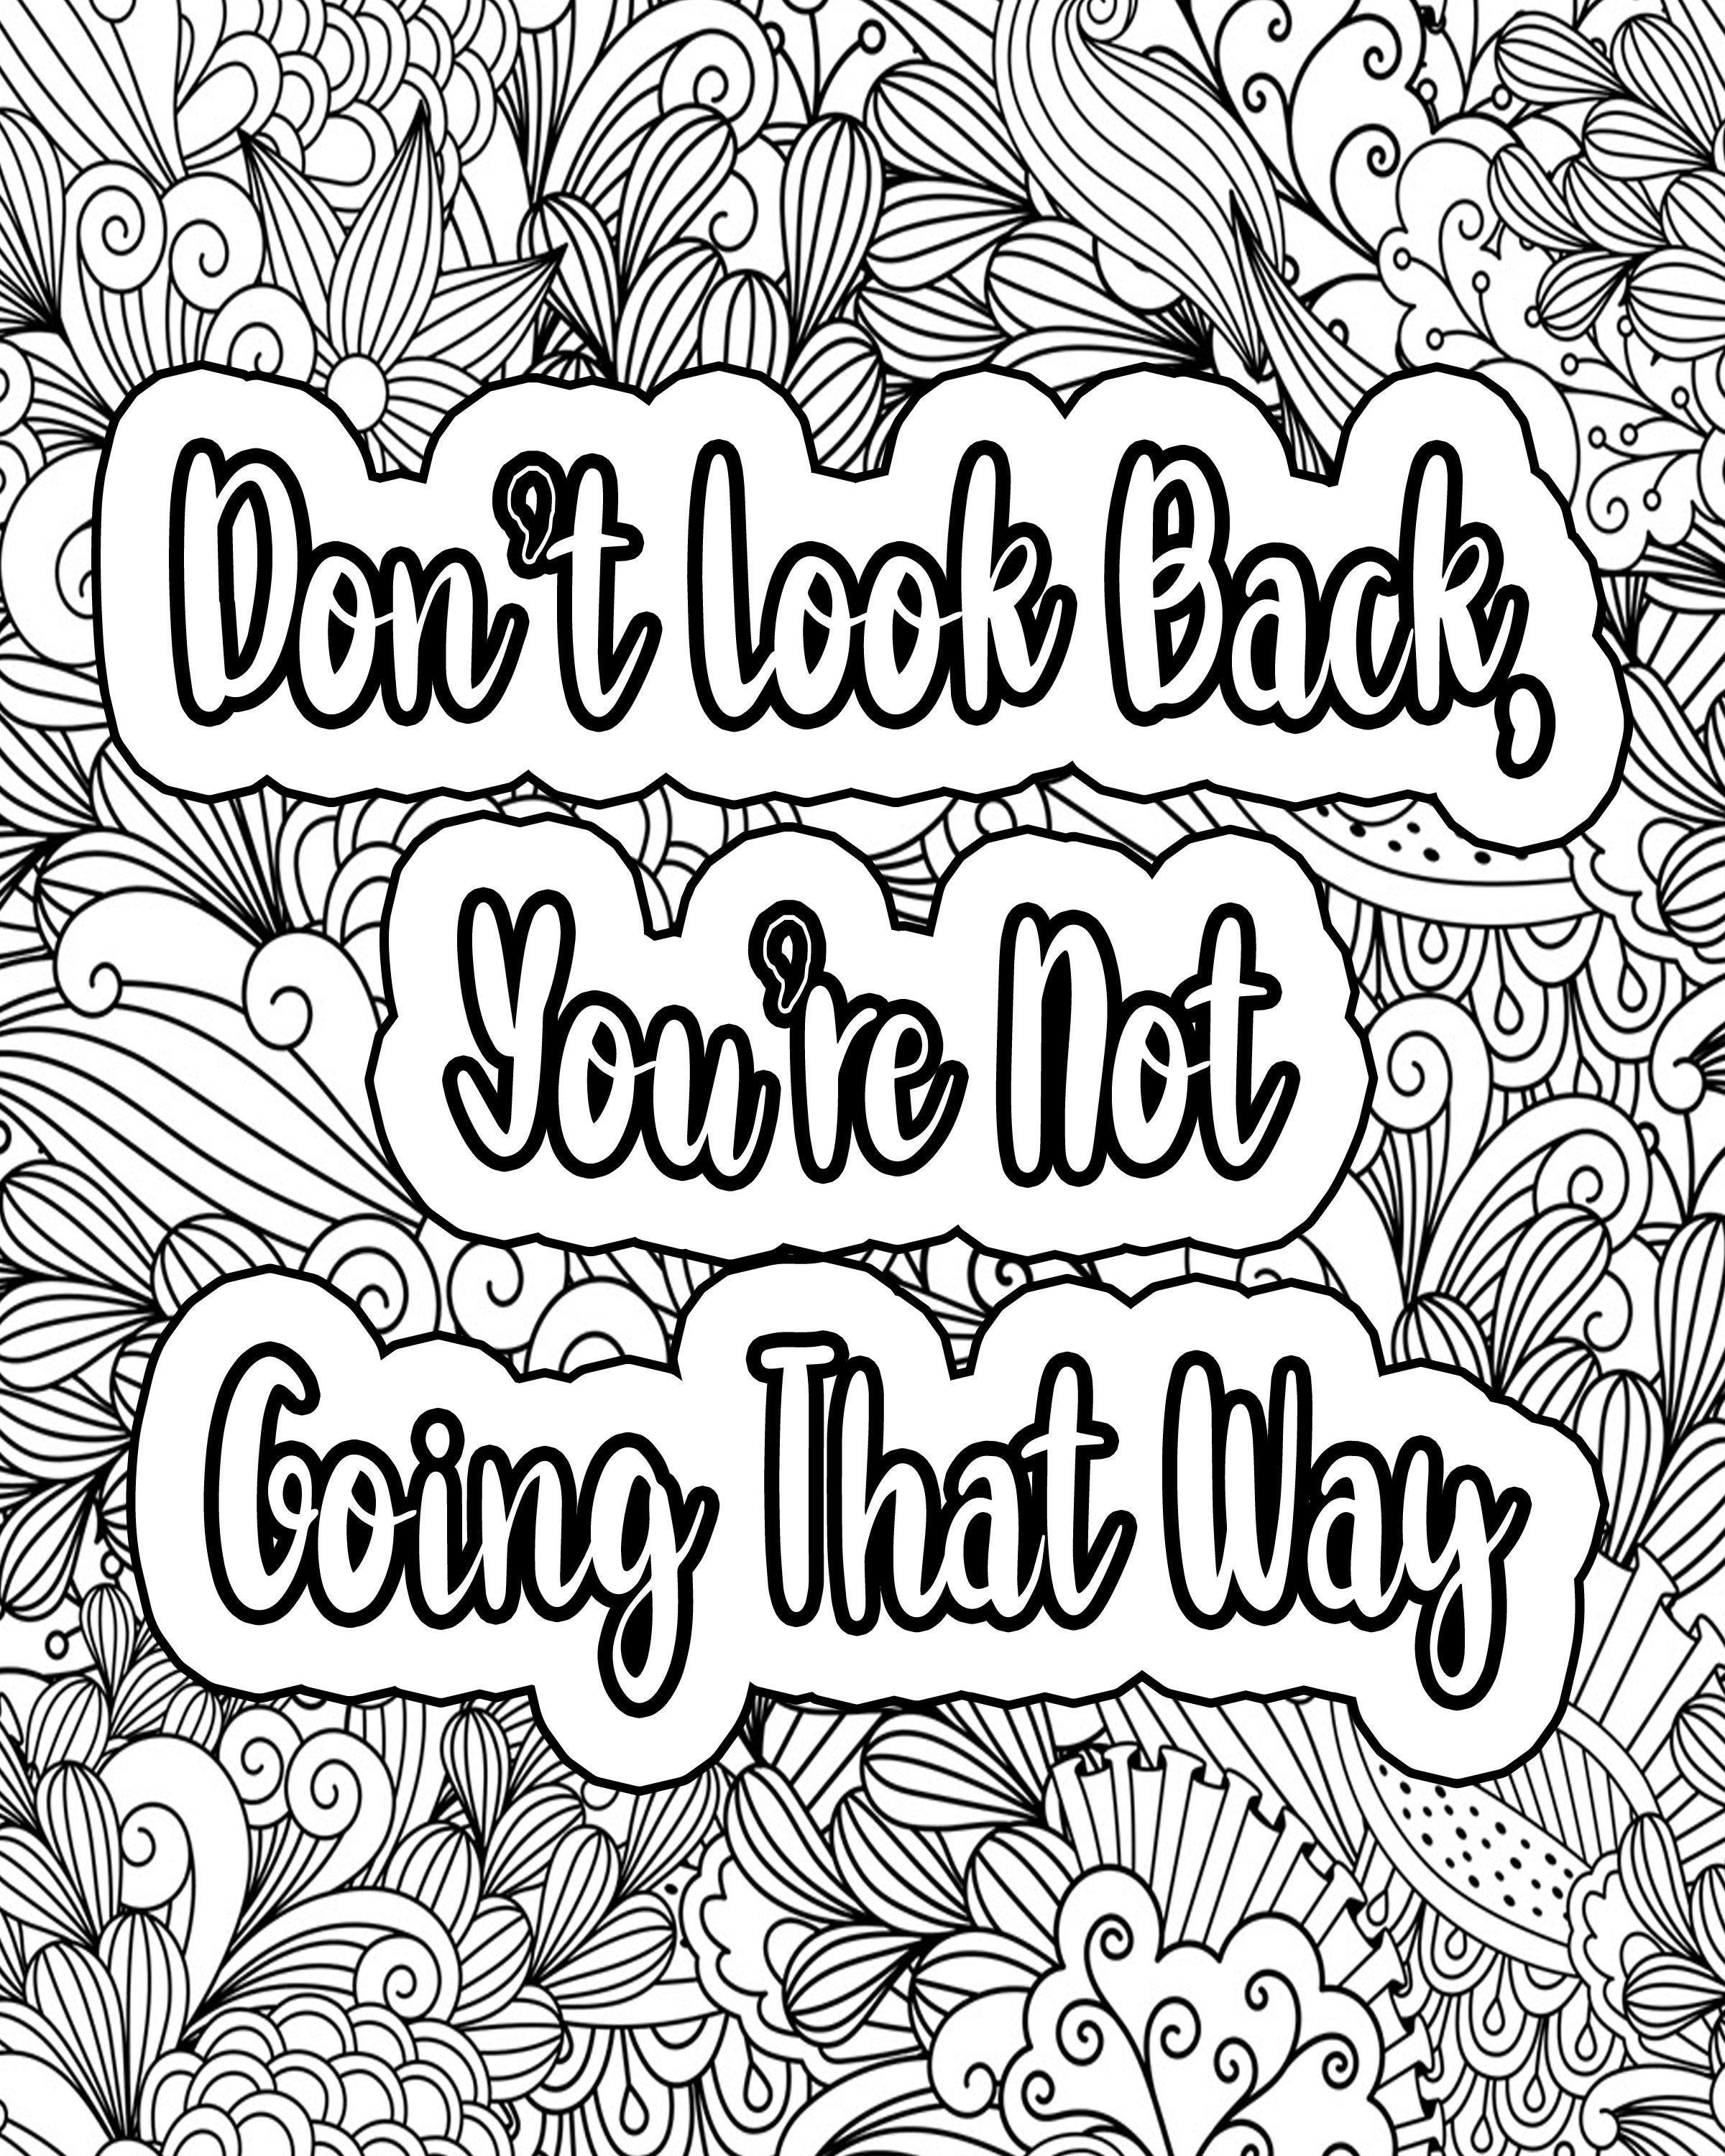 Inspirational Quotes Coloring Pages For Adults. Zentangle Digital